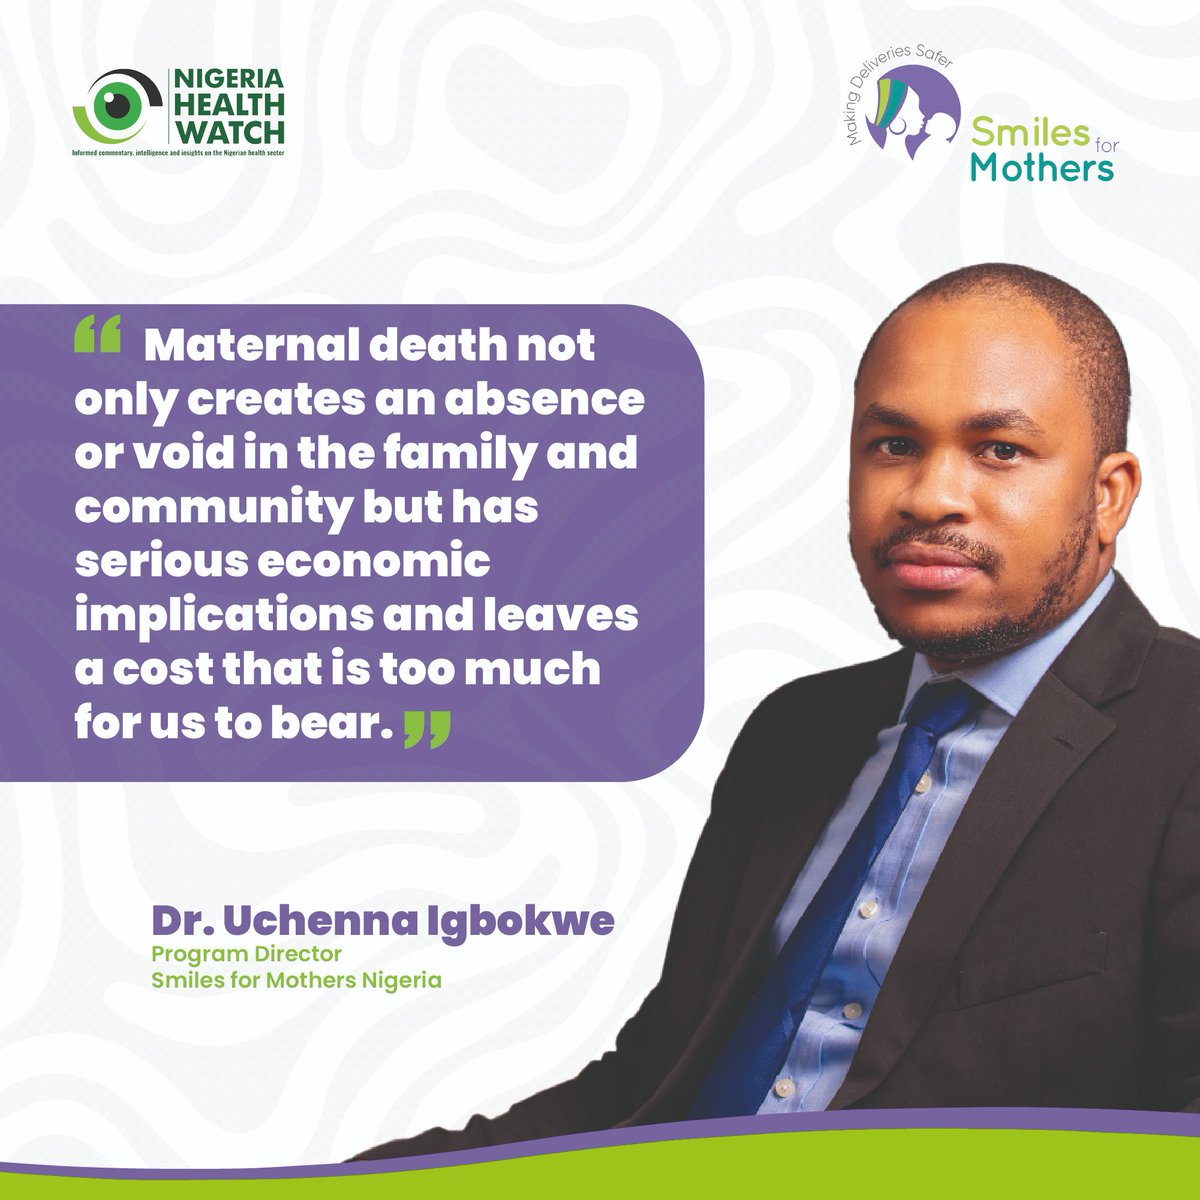 During the webinar, Dr Uchenna Igbokwe, Programme Director, #SmilesForMothers, made a compelling case for why we should #EndMaternalMortality. Maternal death has deep economic implications for all. It must be addressed; pregnancy is not a disease, it shouldn't lead to death.